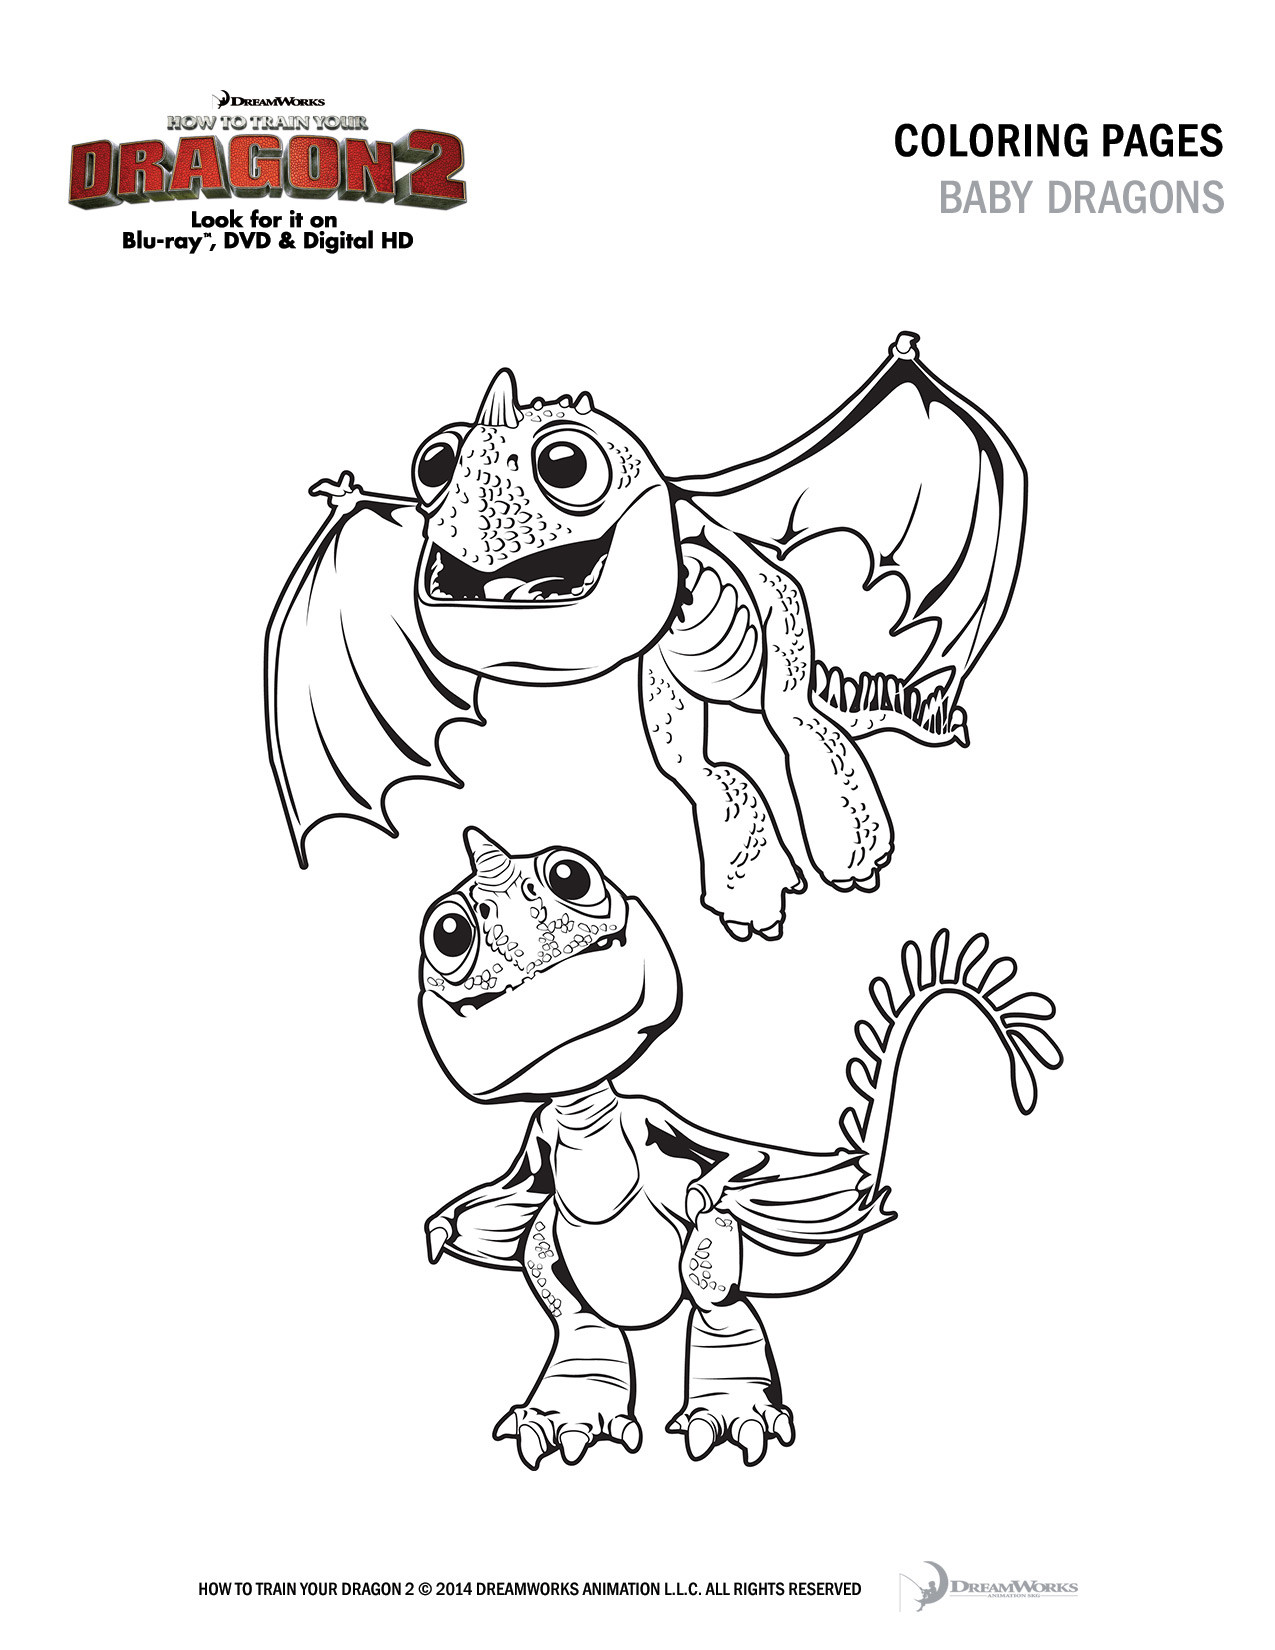 How To Train Your Dragon Coloring Pages
 How to Train Your Dragon 2 Free Coloring and Activity